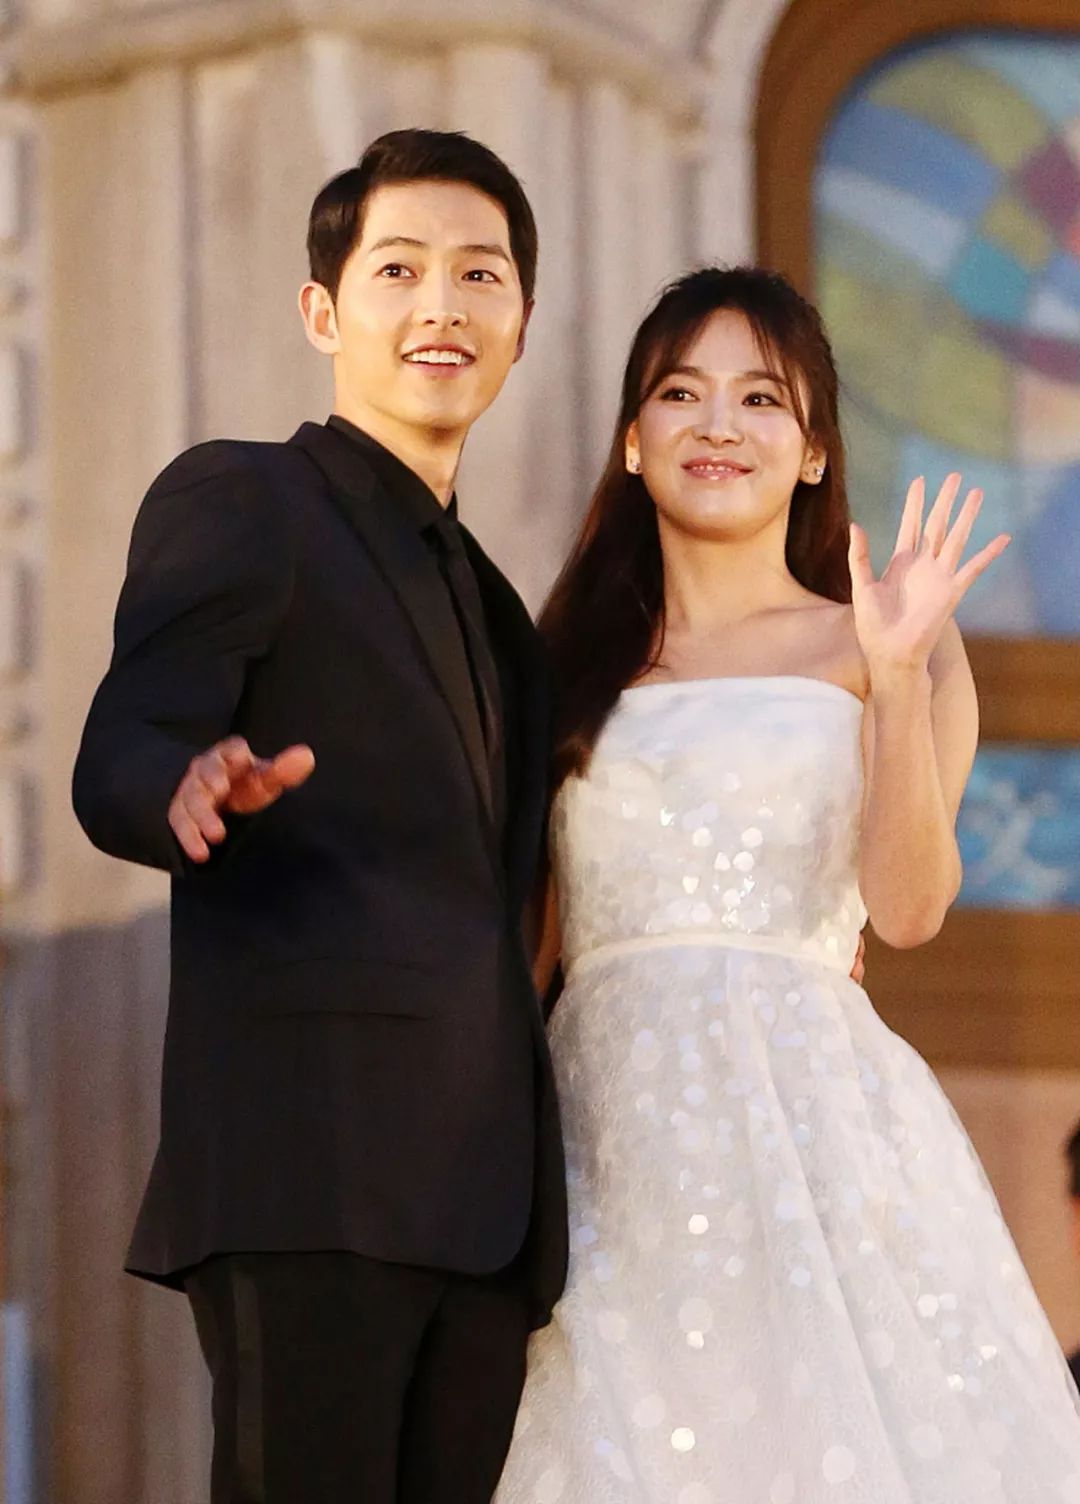 Song Joong Ki Vowed To Song Hye Kyo On Their Wedding Day - Love&Likes